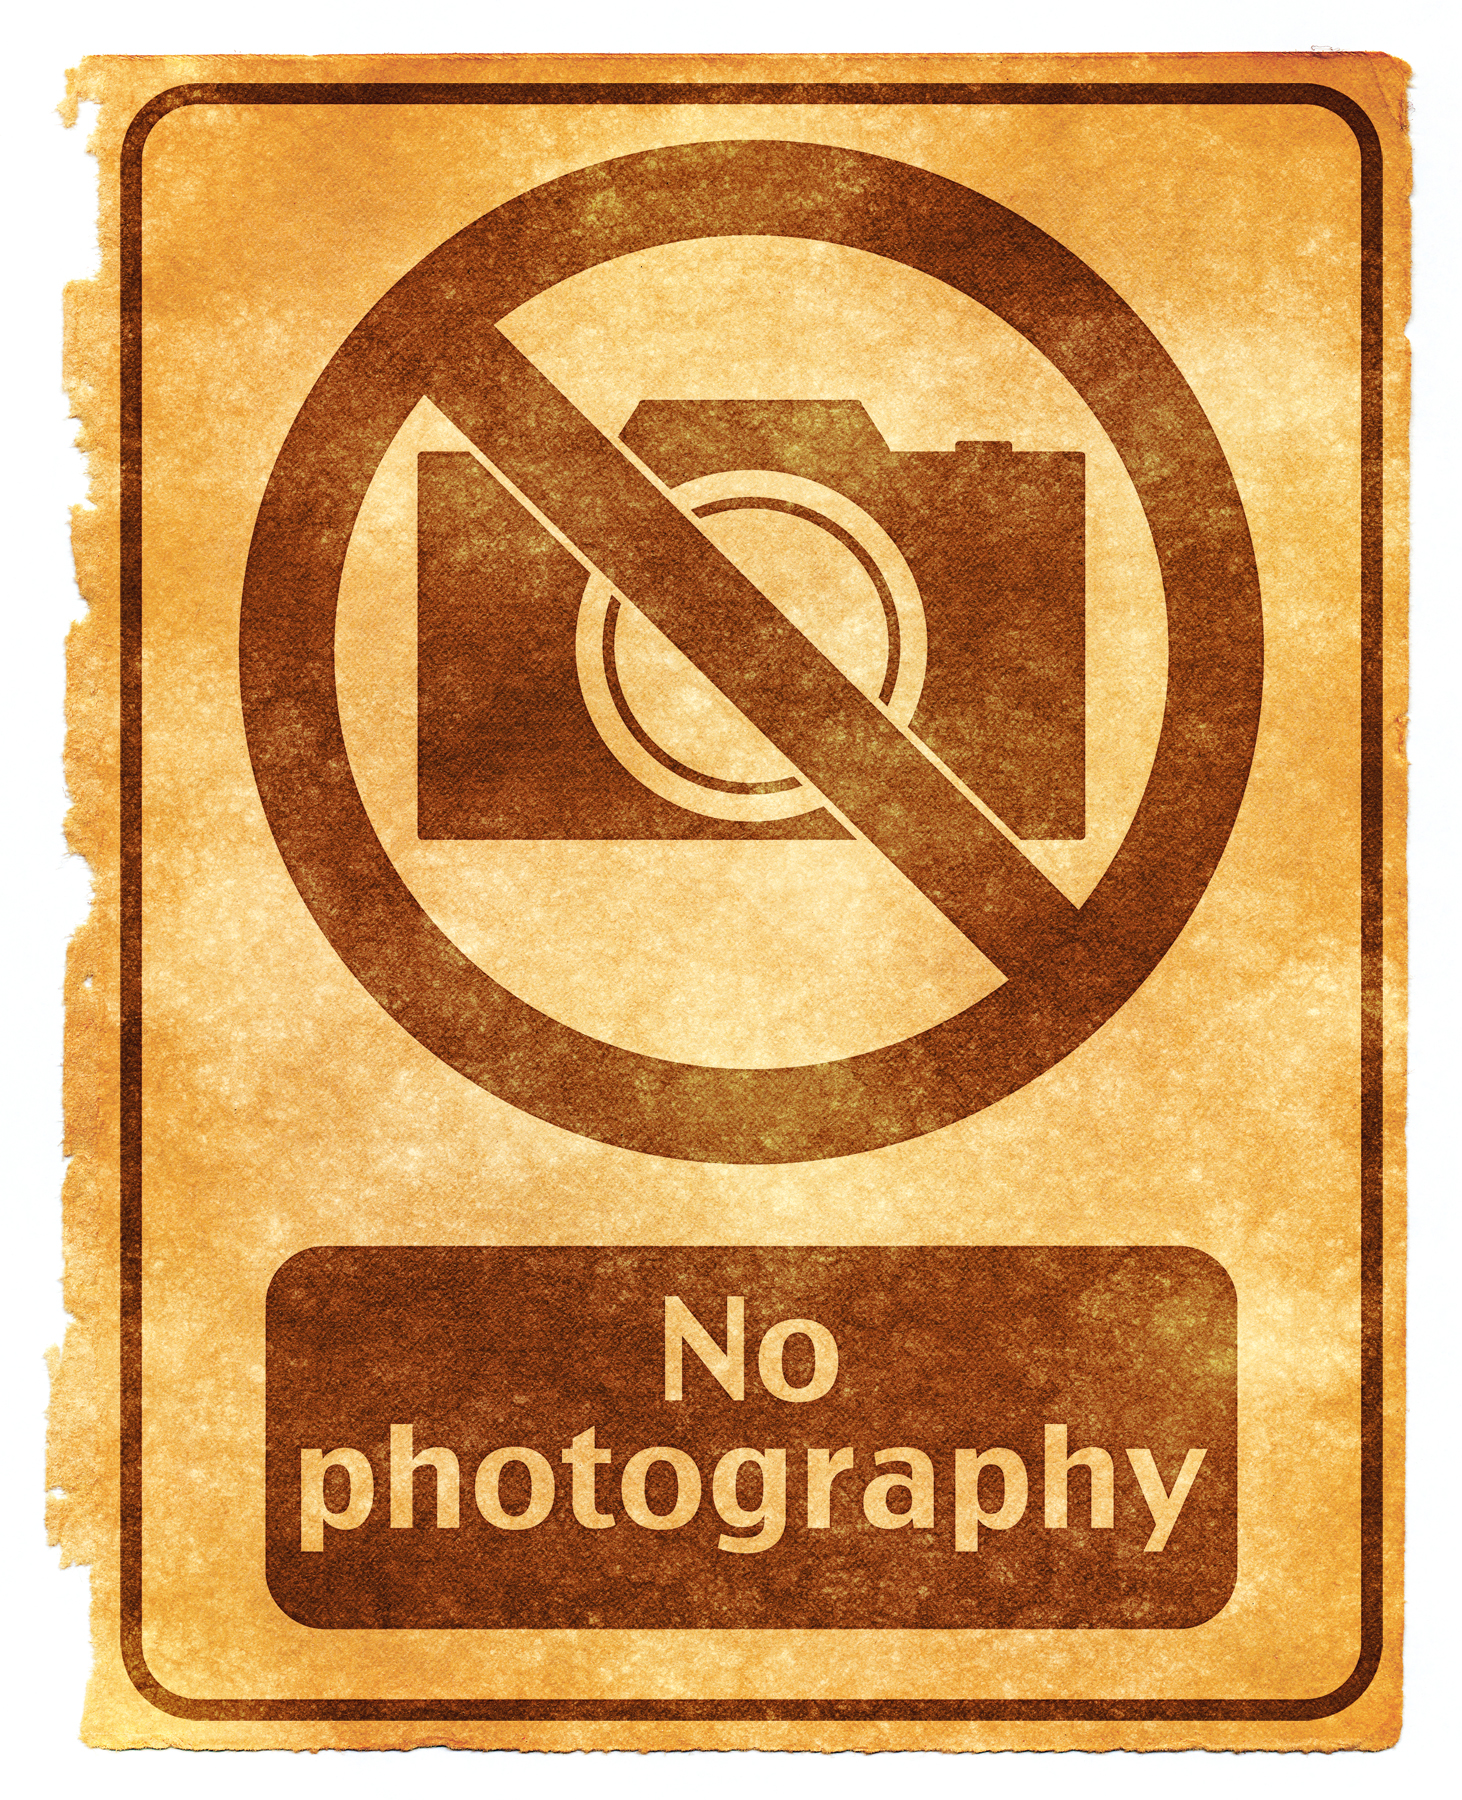 No photography grunge sign